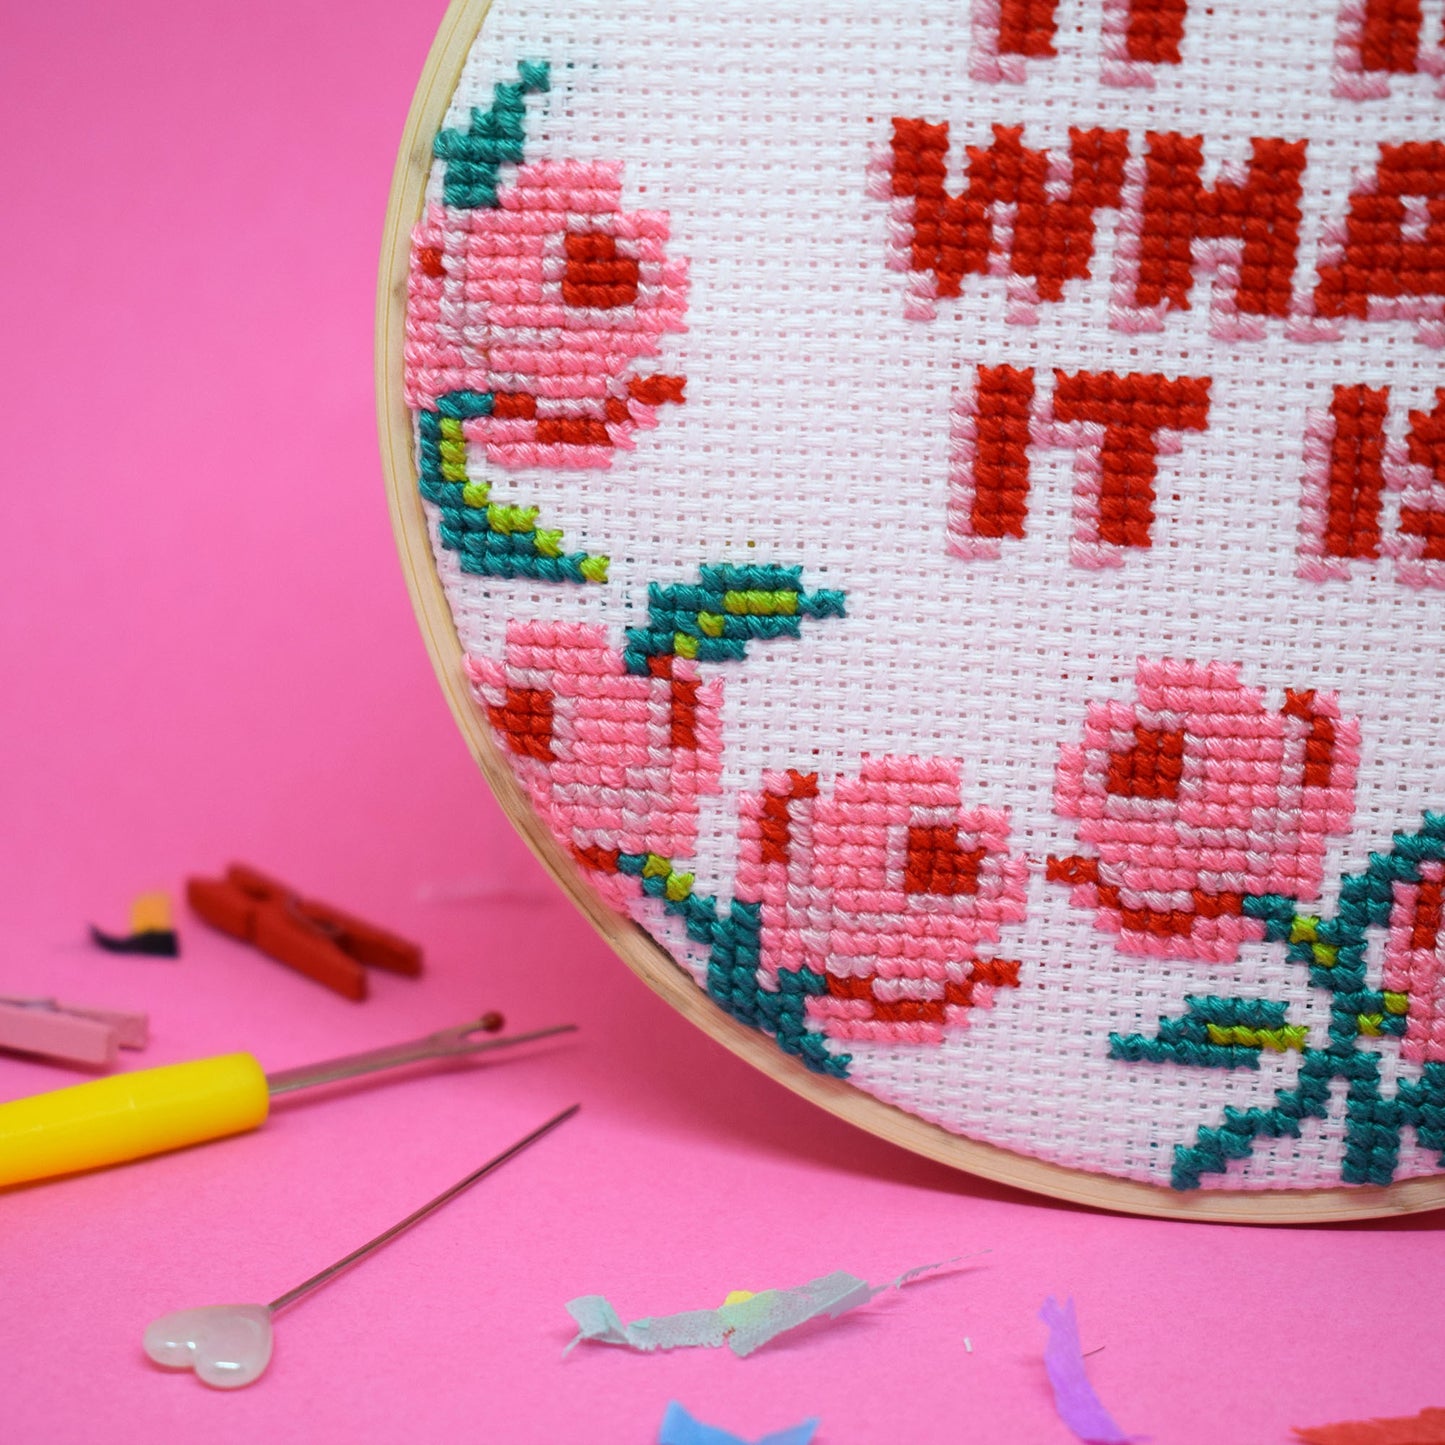 'It Is What It Is' Large Cross Stitch Kit